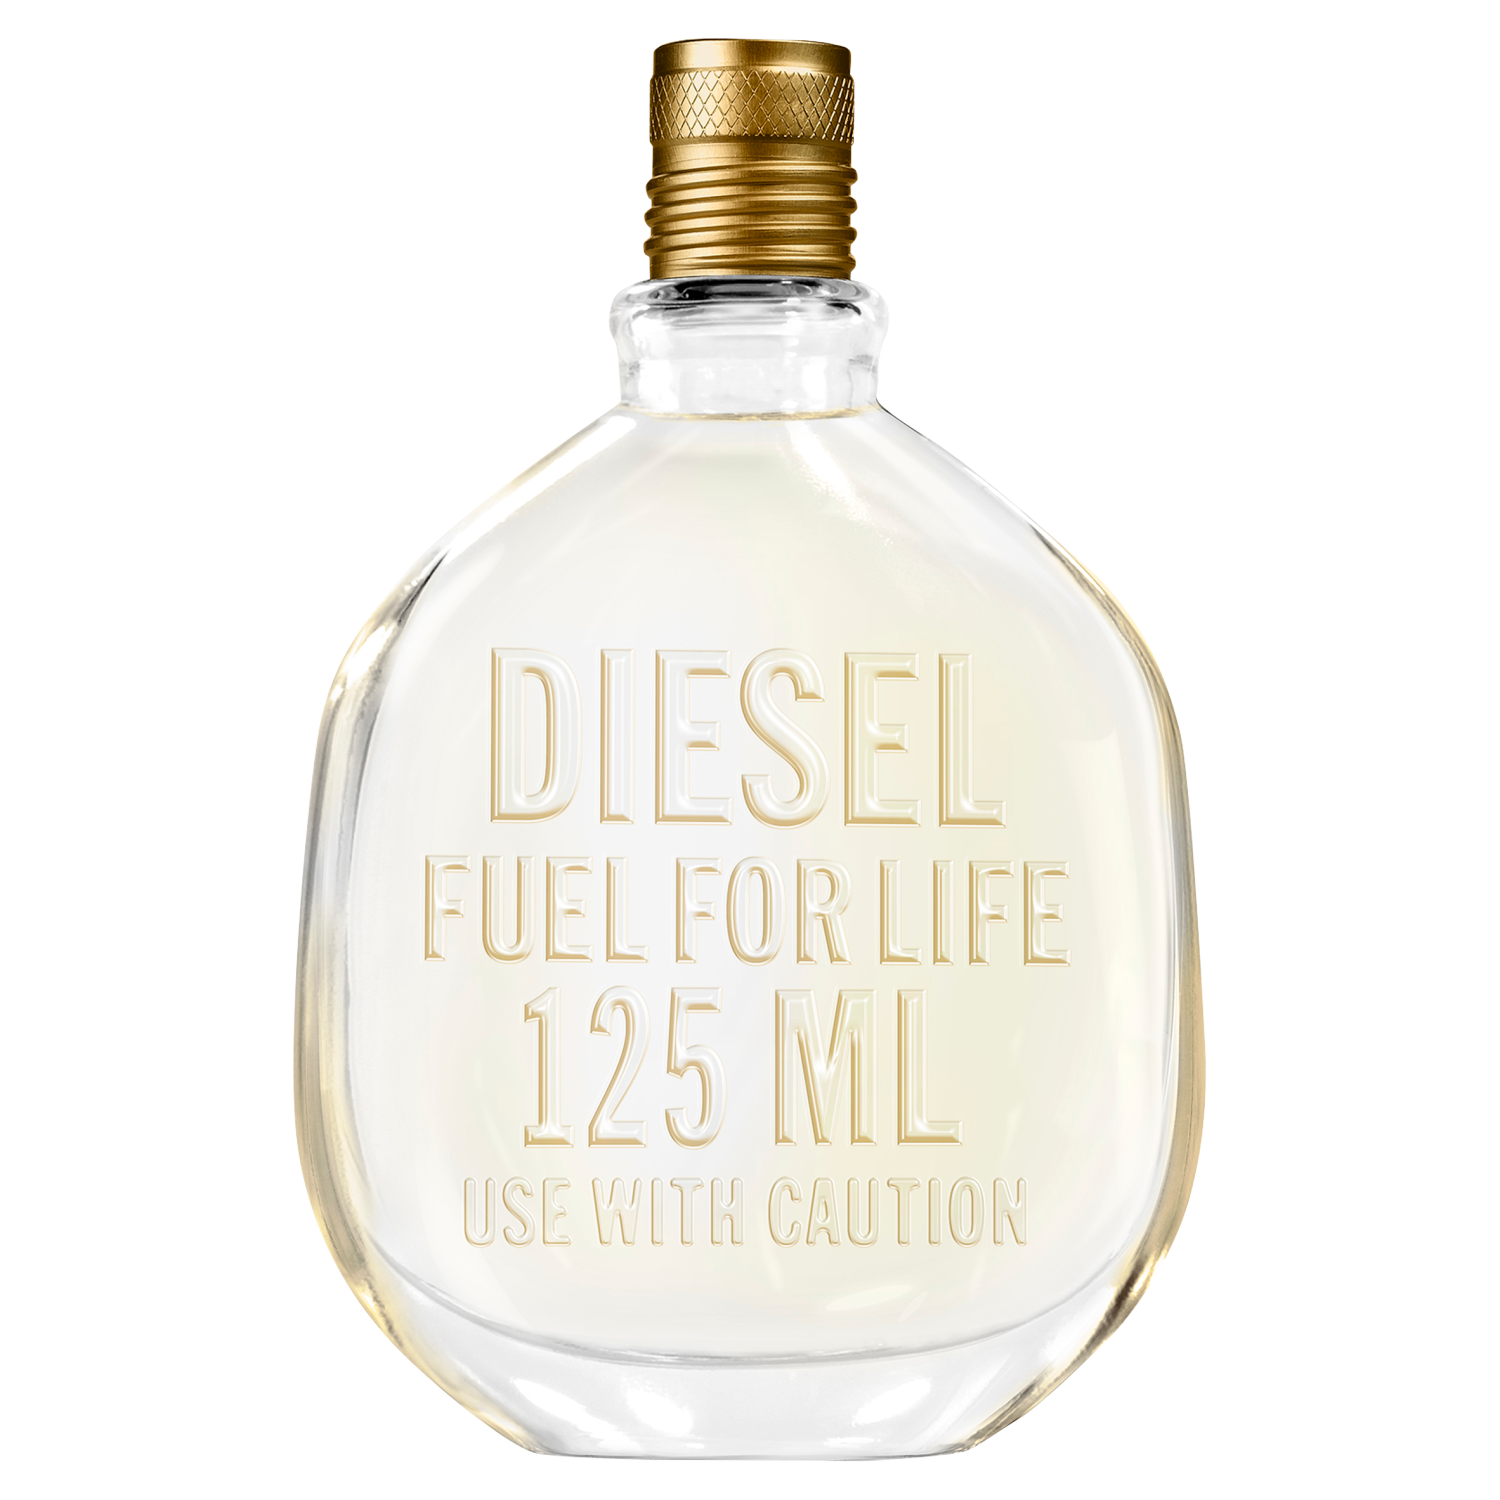 Мужская туалетная вода Diesel Fuel For Life Homme, 125 мл zck150s629 zck150s430a zck150s535 zck155s523 zck155s525 zck155s523a zck160sy527 brand original diesel fuel injection nozzle